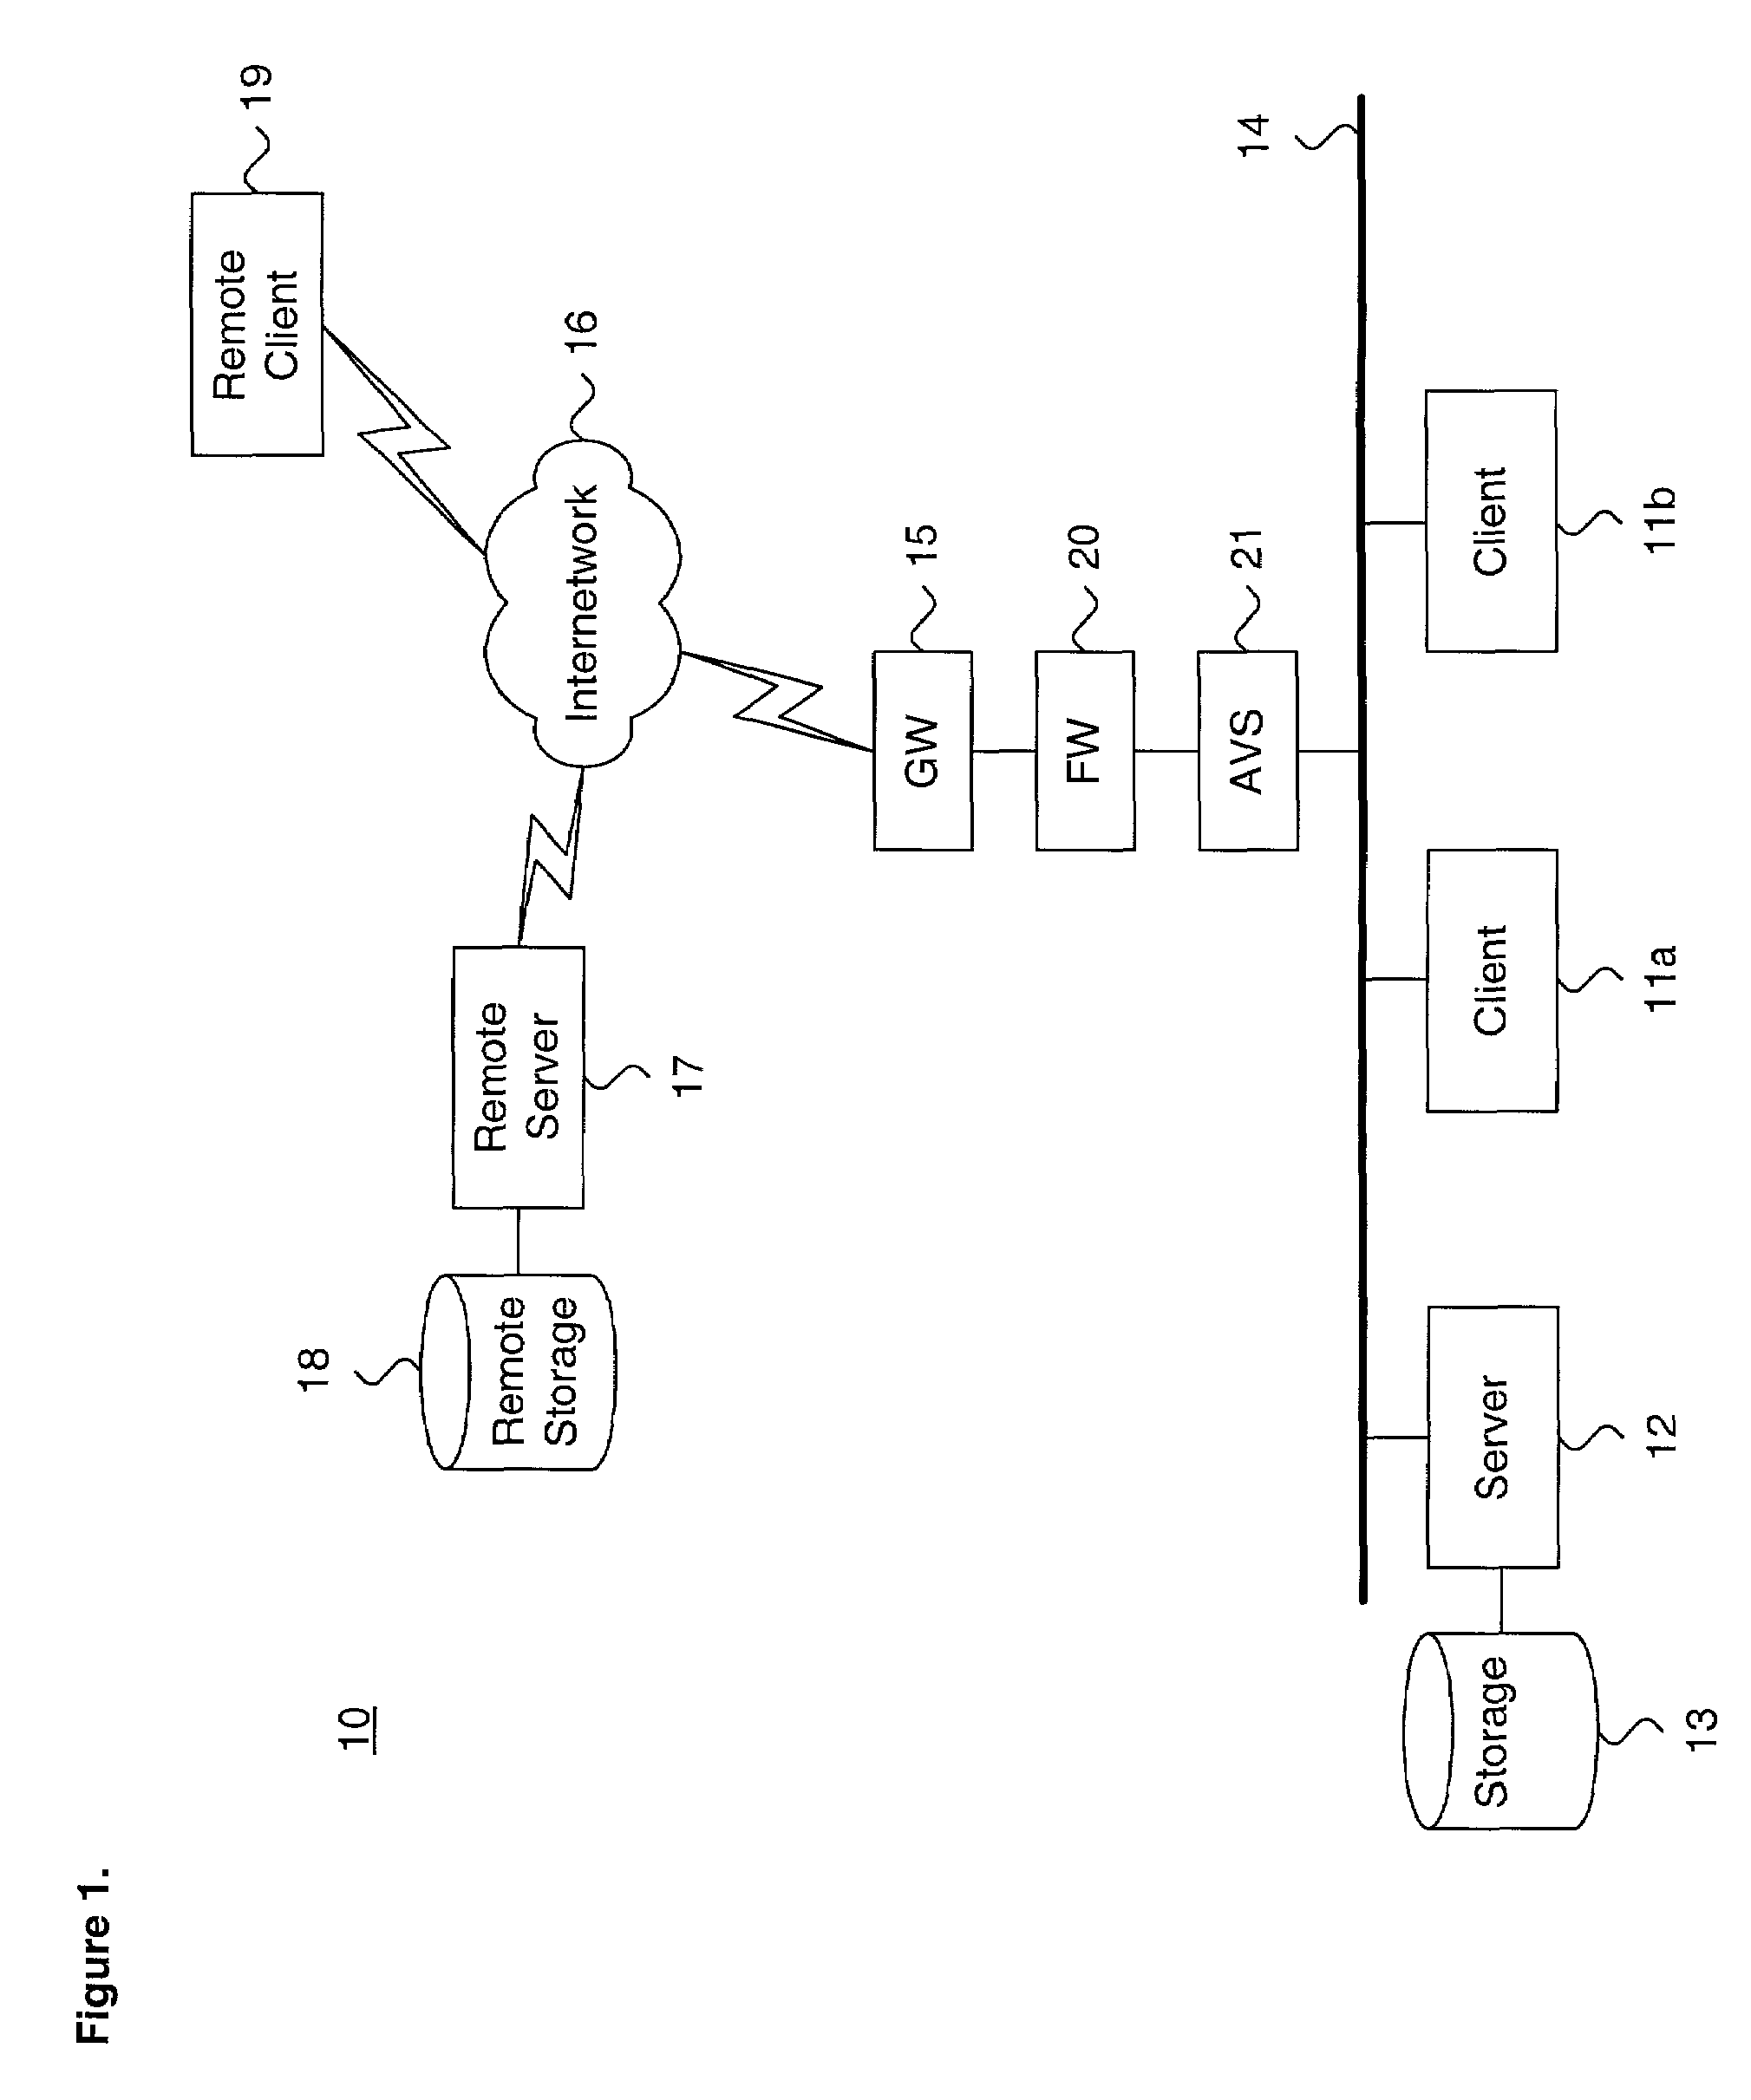 System and method for performing efficient computer virus scanning of transient messages using checksums in a distributed computing environment